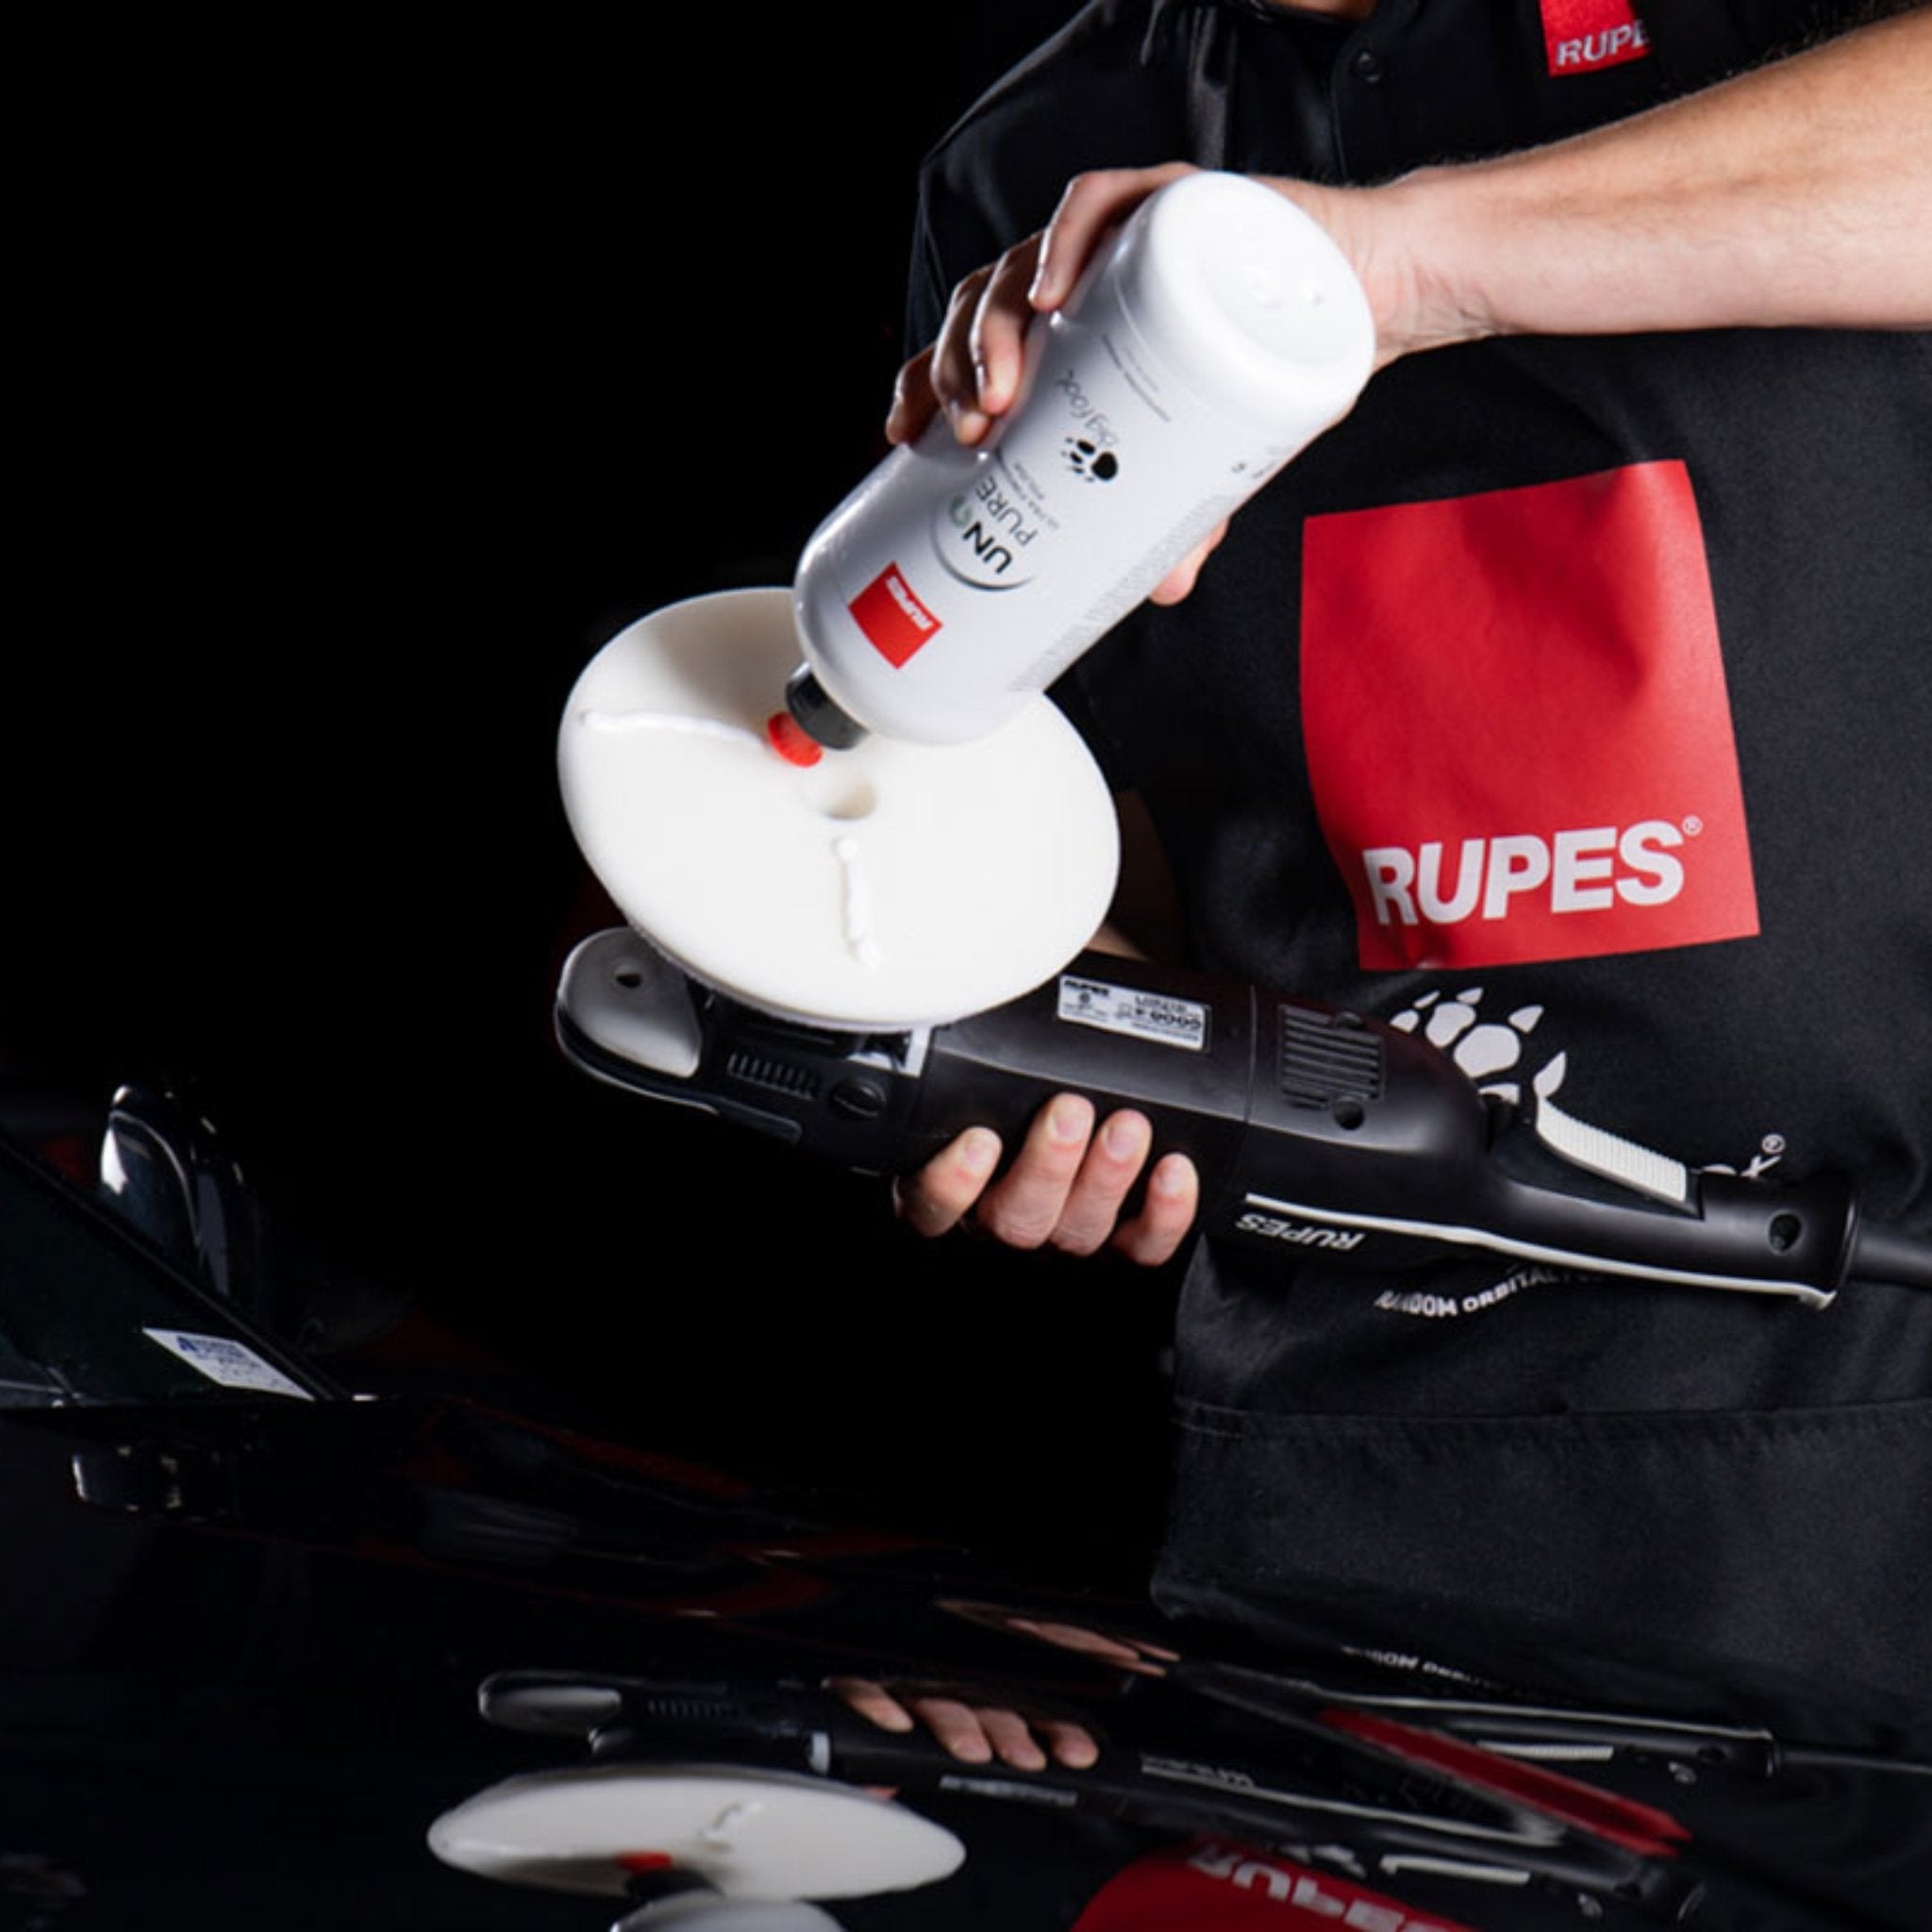 Rupes High Performance Ultra Fine Finishing White Foam Pad - D/A - Bocar Depot Mississauga - Rupes -- Bocar Depot Mississauga